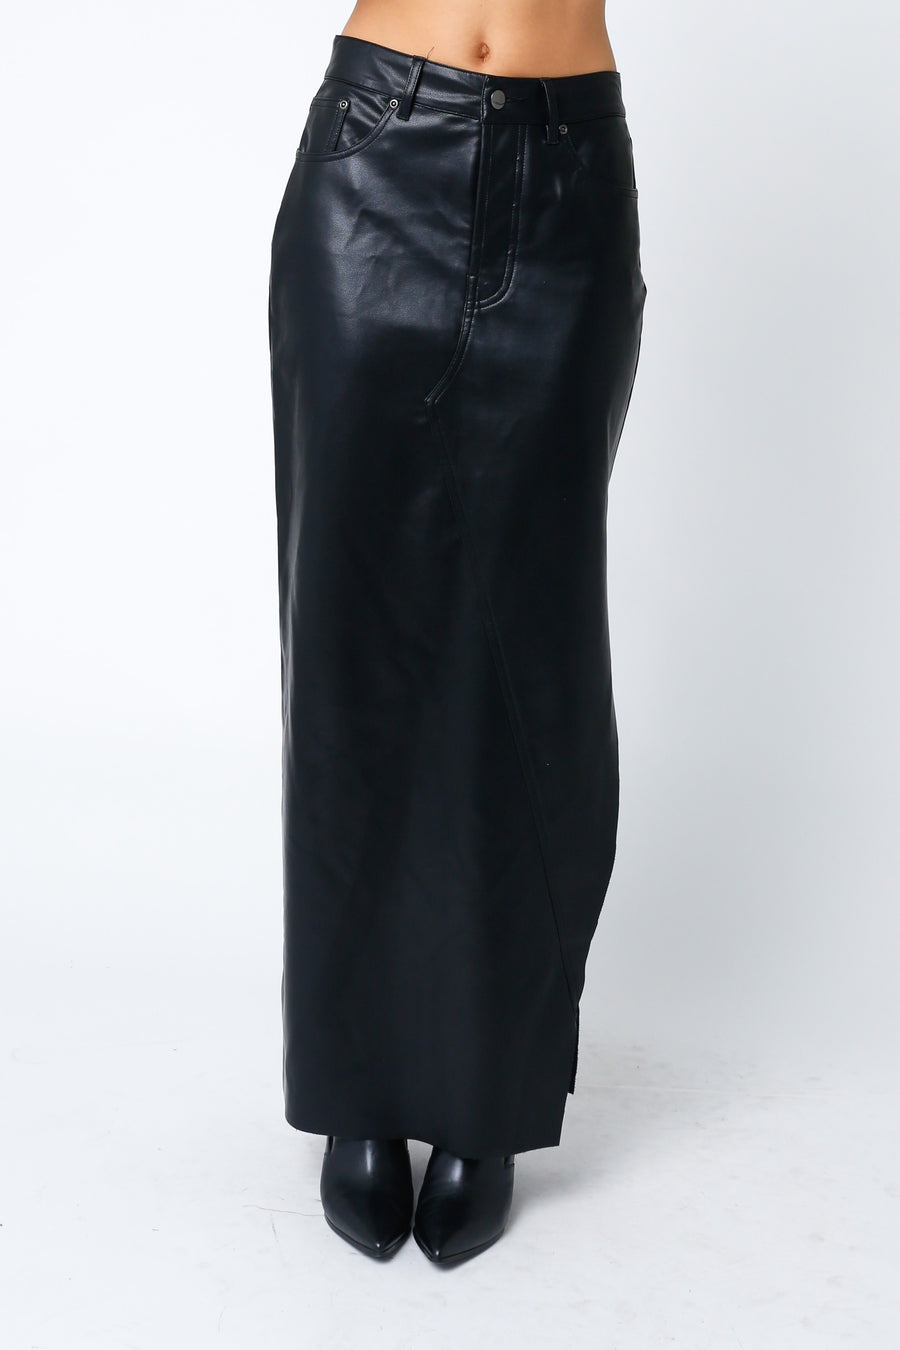 Black leather maxi skirt with side slit. 